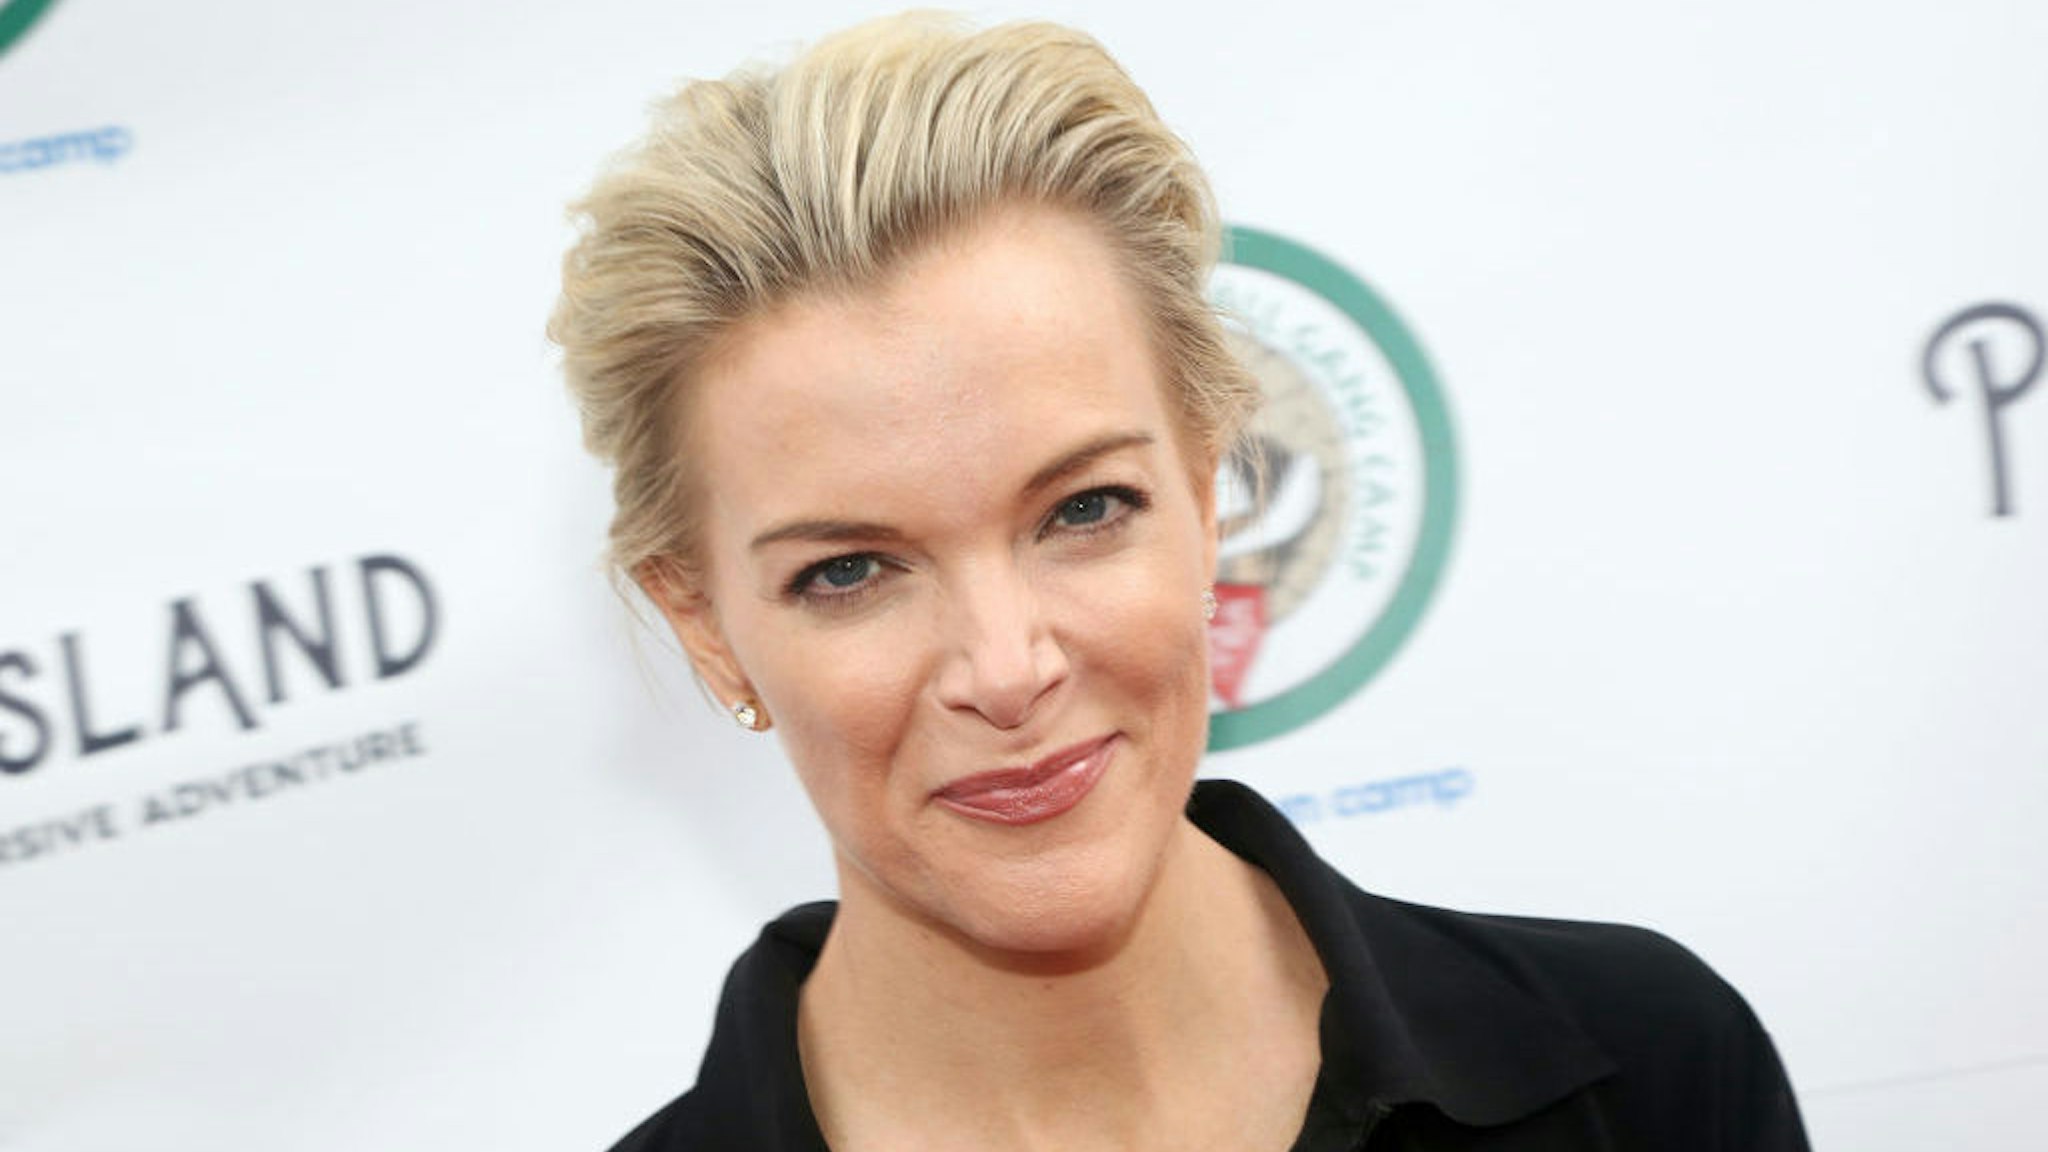 NEW YORK, NY MAY20: Megyn Kelly poses at The Opening Night celebration for Pip's Island benefiting the Hole in the Wall Gang Camp at 400 West 42nd Street on May 20, 2019 in New York City. (Photo by Bruce Glikas/Getty Images)